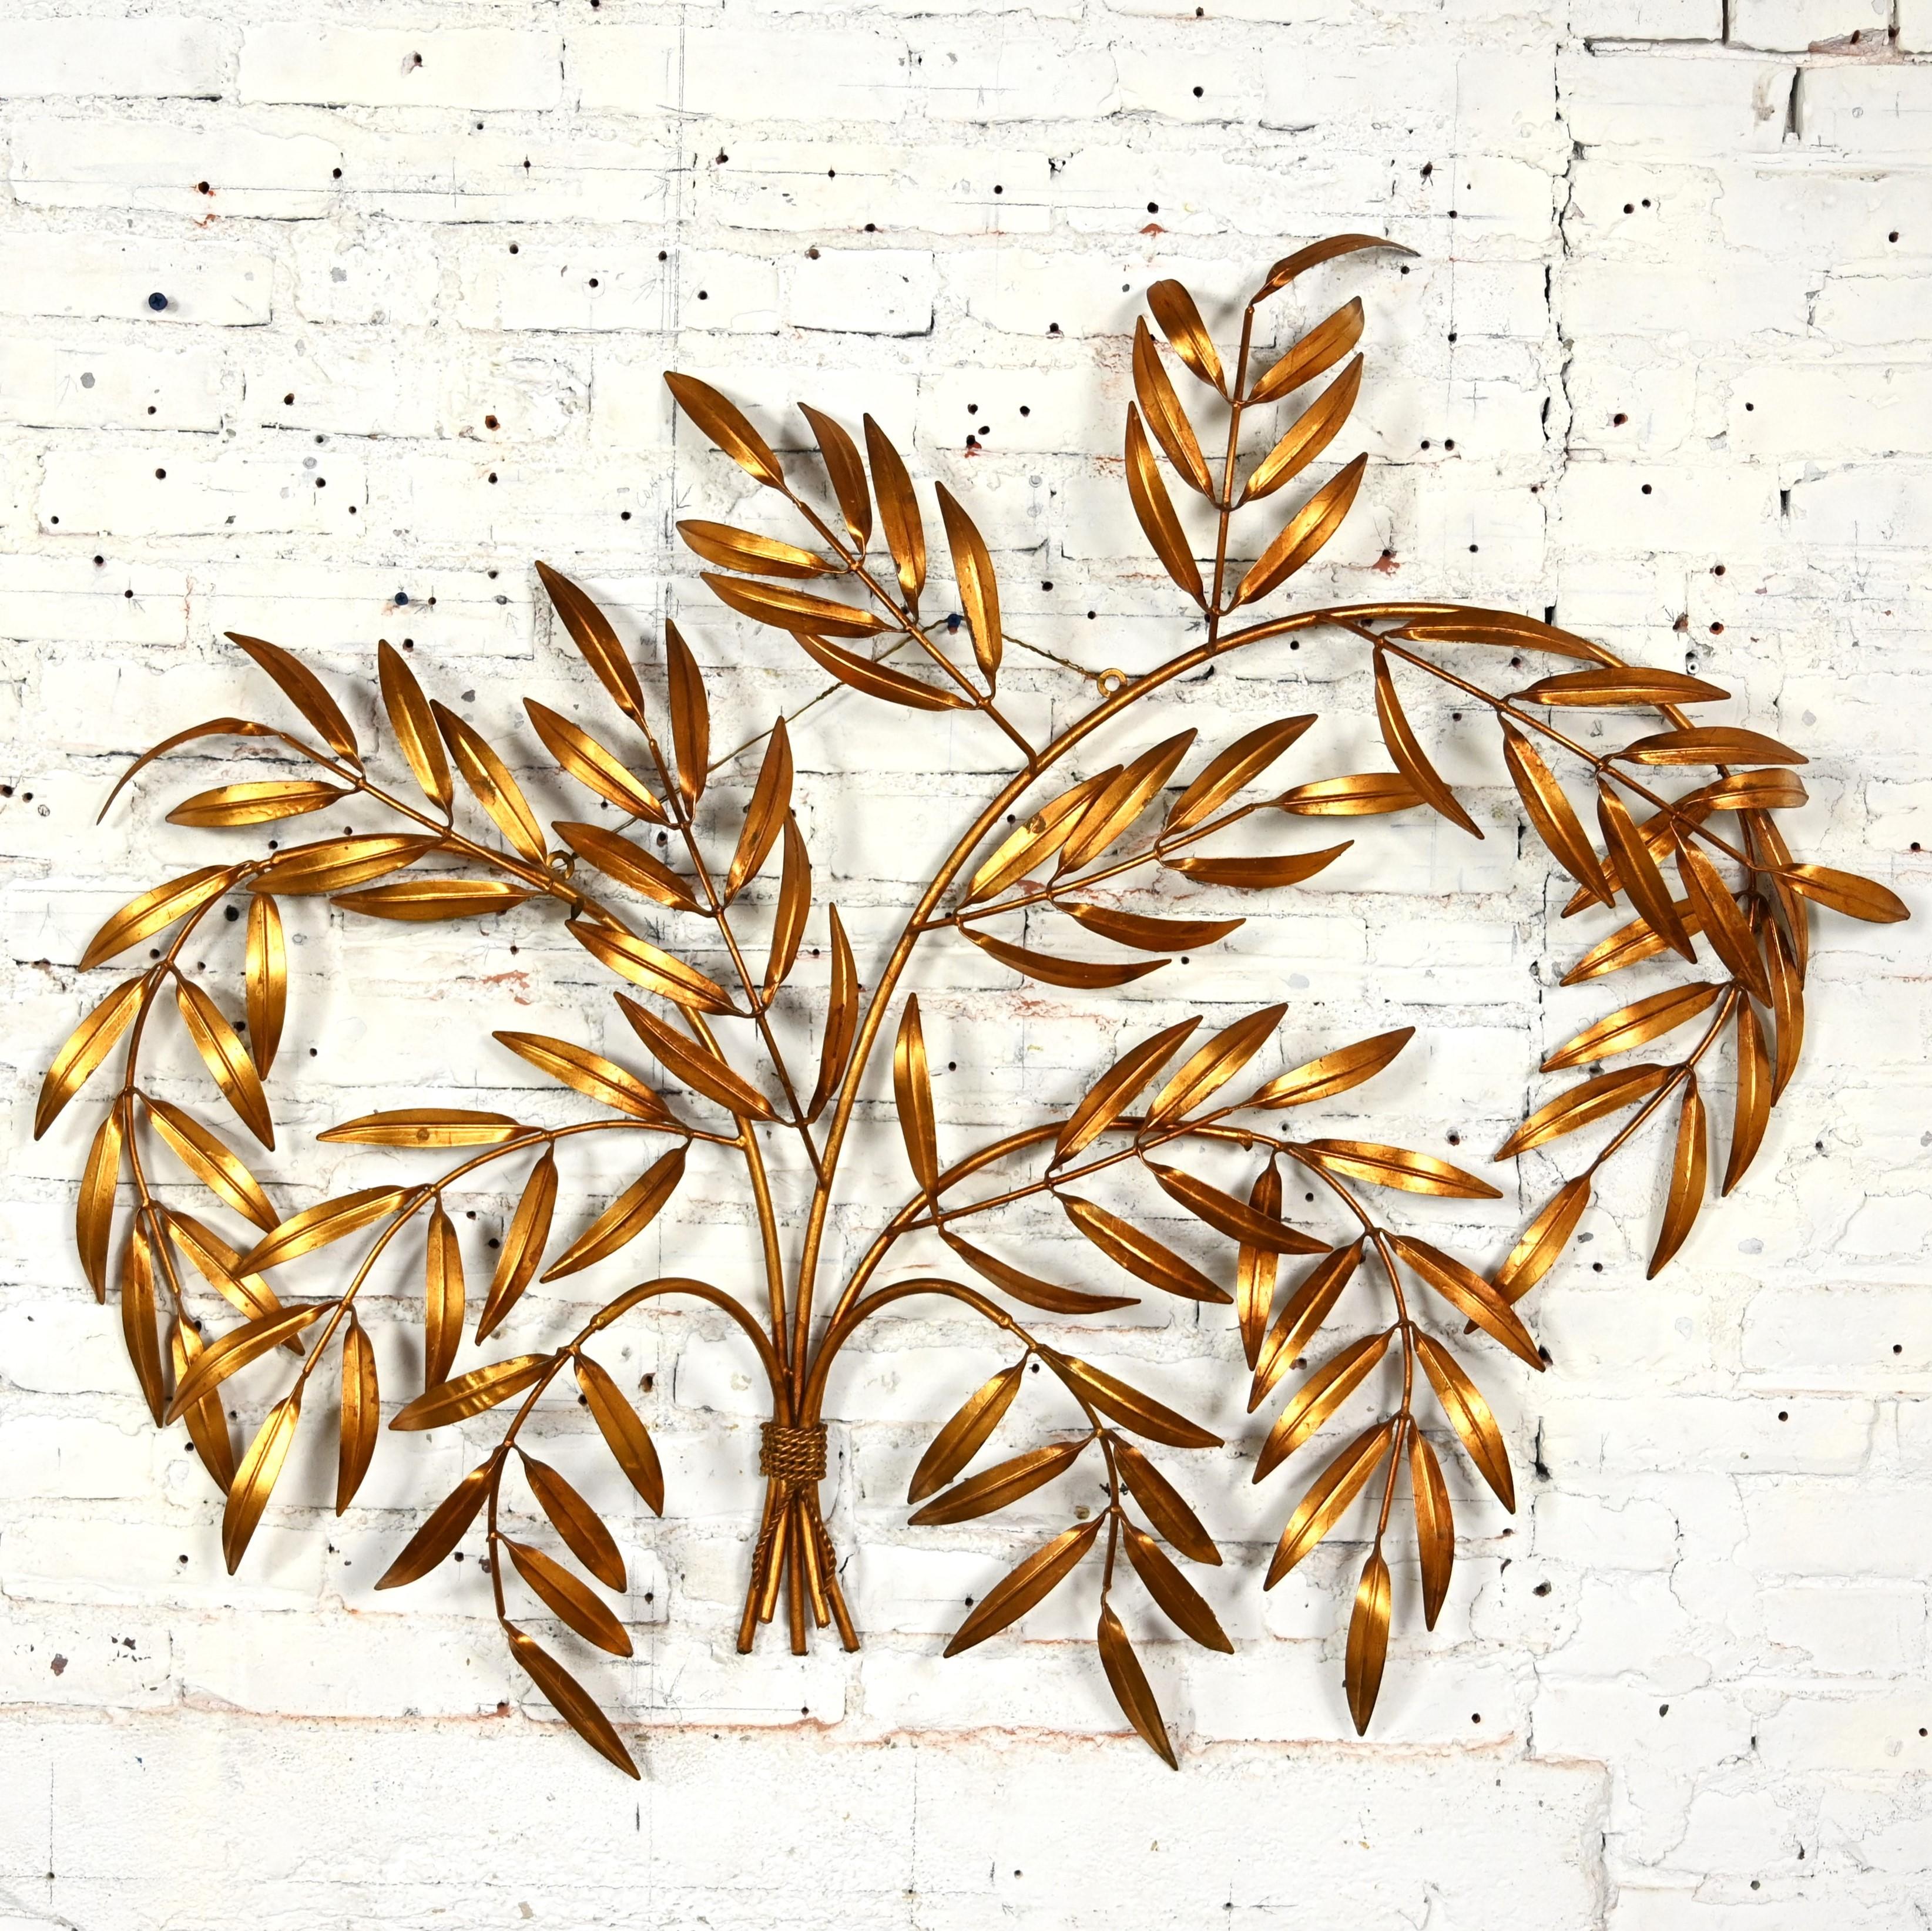 Incredible vintage Italian Mid Century Hollywood Regency gilt metal wall sculpture of branches with leaves. Beautiful condition, keeping in mind that this is vintage and not new so will have signs of use and wear even if they have been restored or